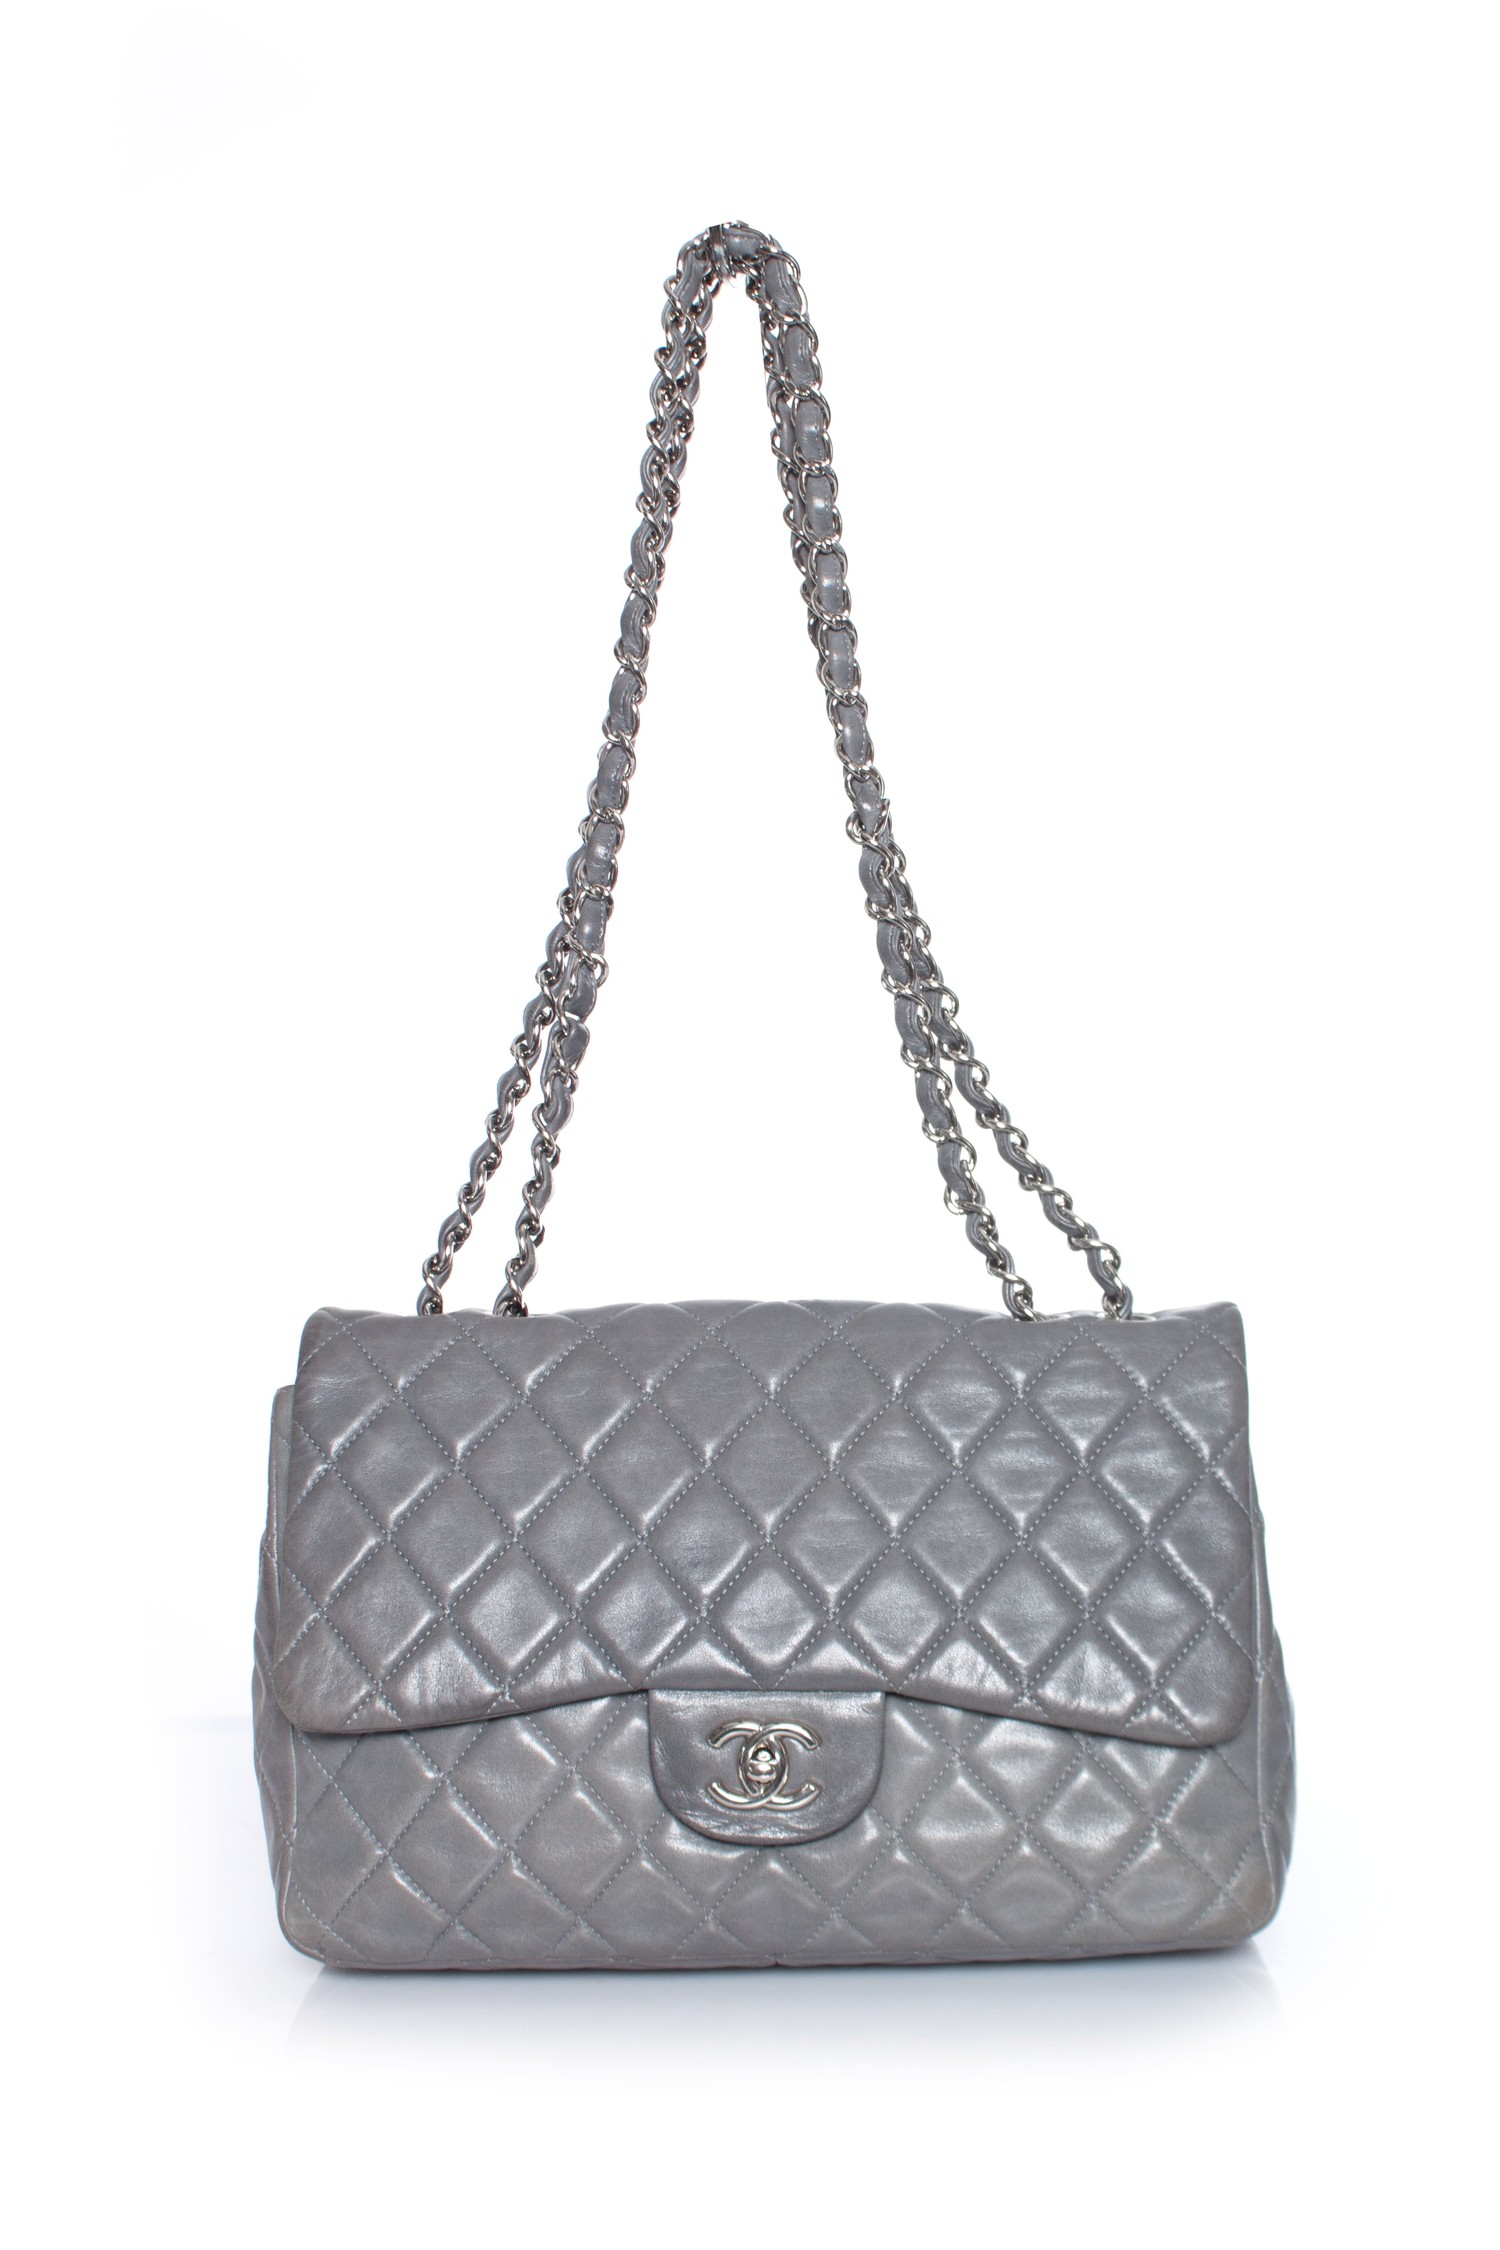 chanel chanel large classic flap bag with silver h